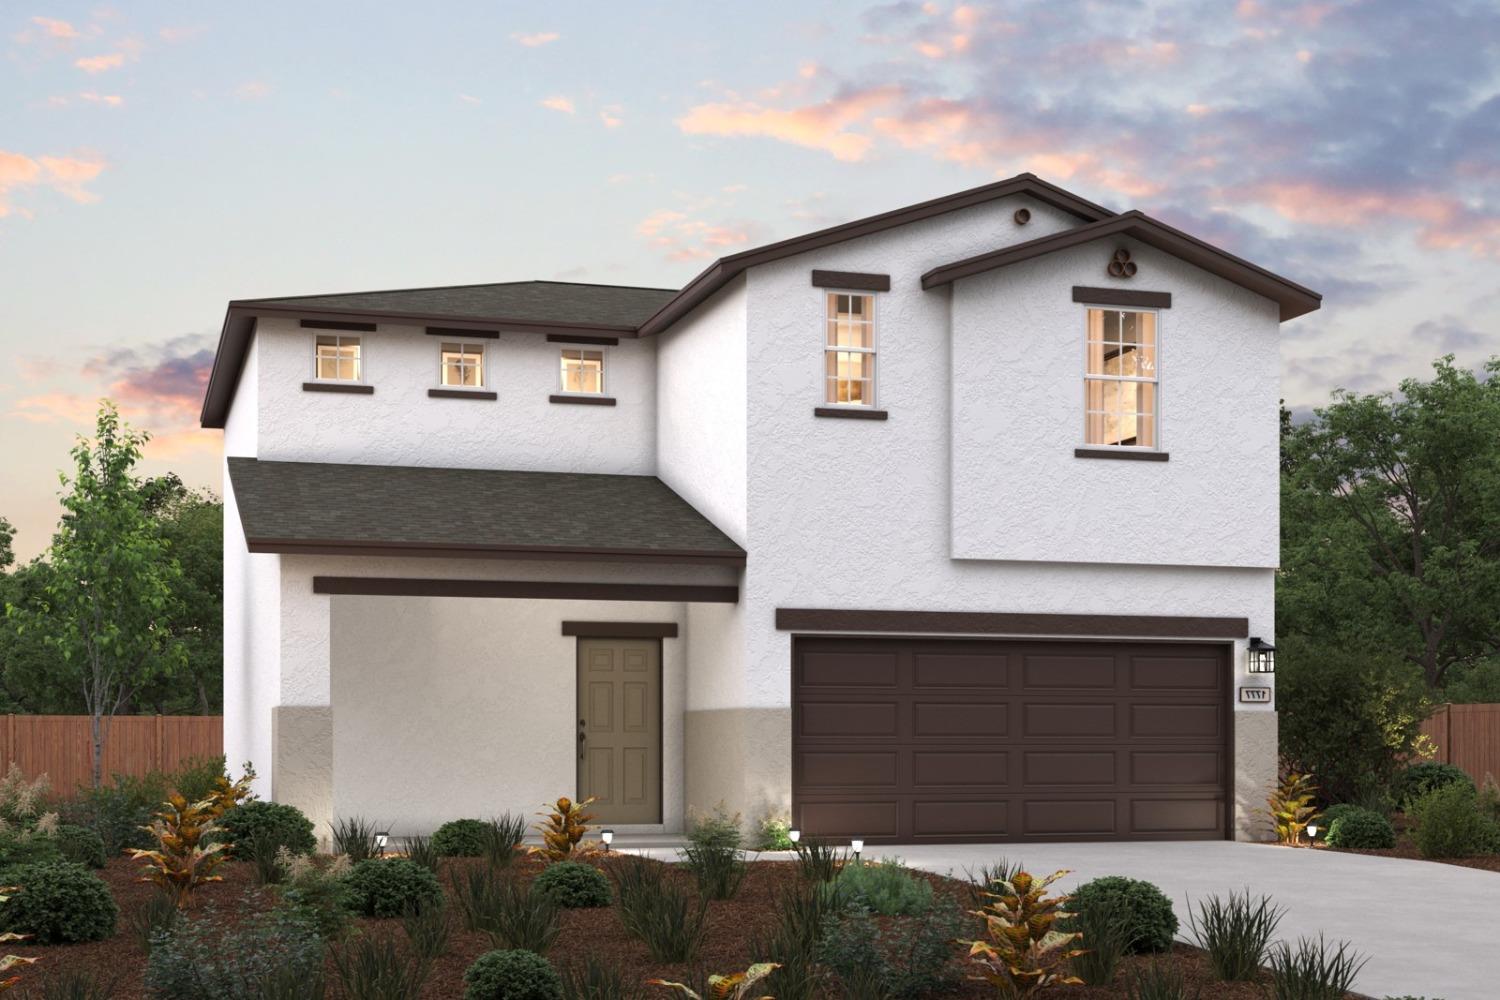 The Laurel at Crest View offers a balanced two-story layout. The main level showcases a unified dini